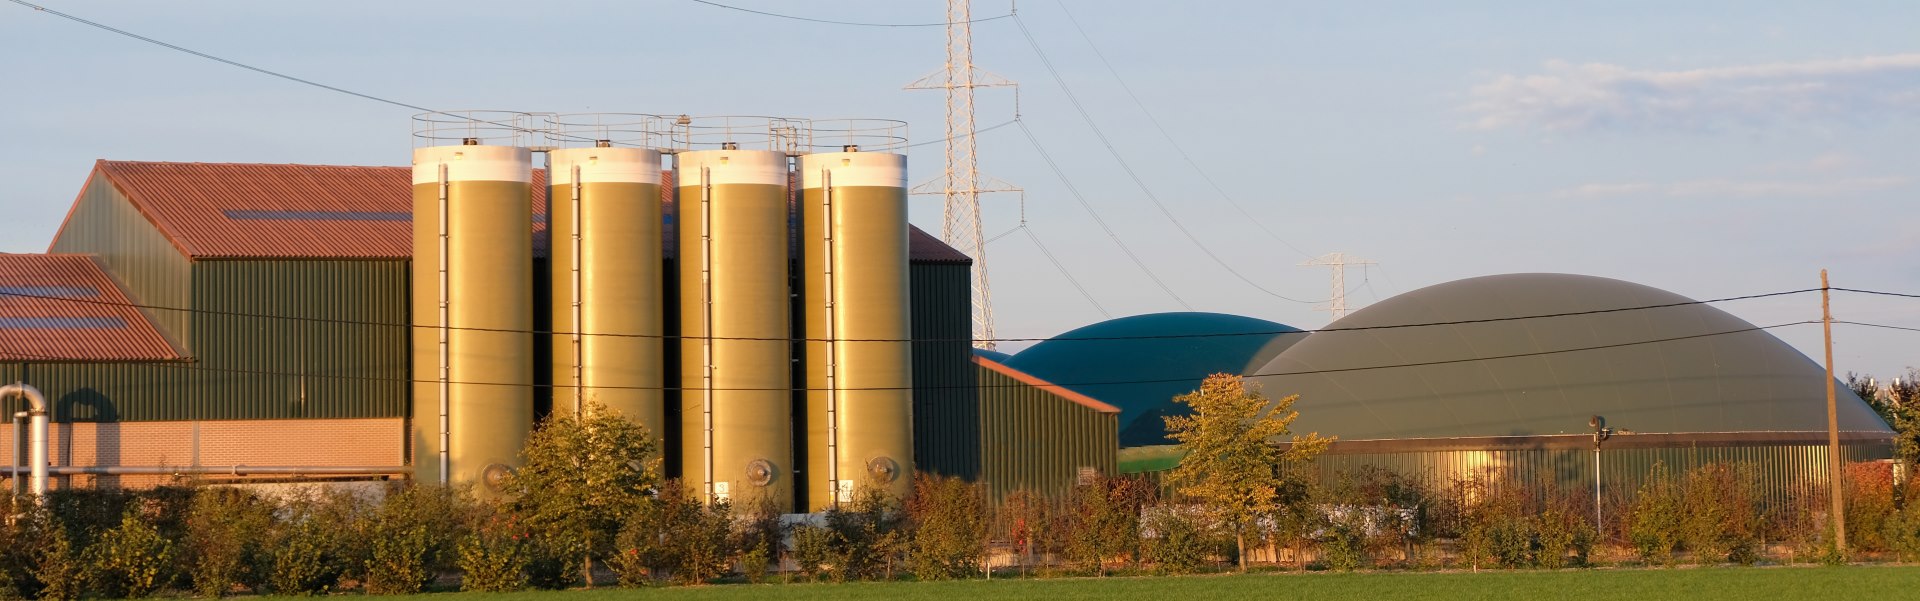 silos--vergisters_cropped.jpg